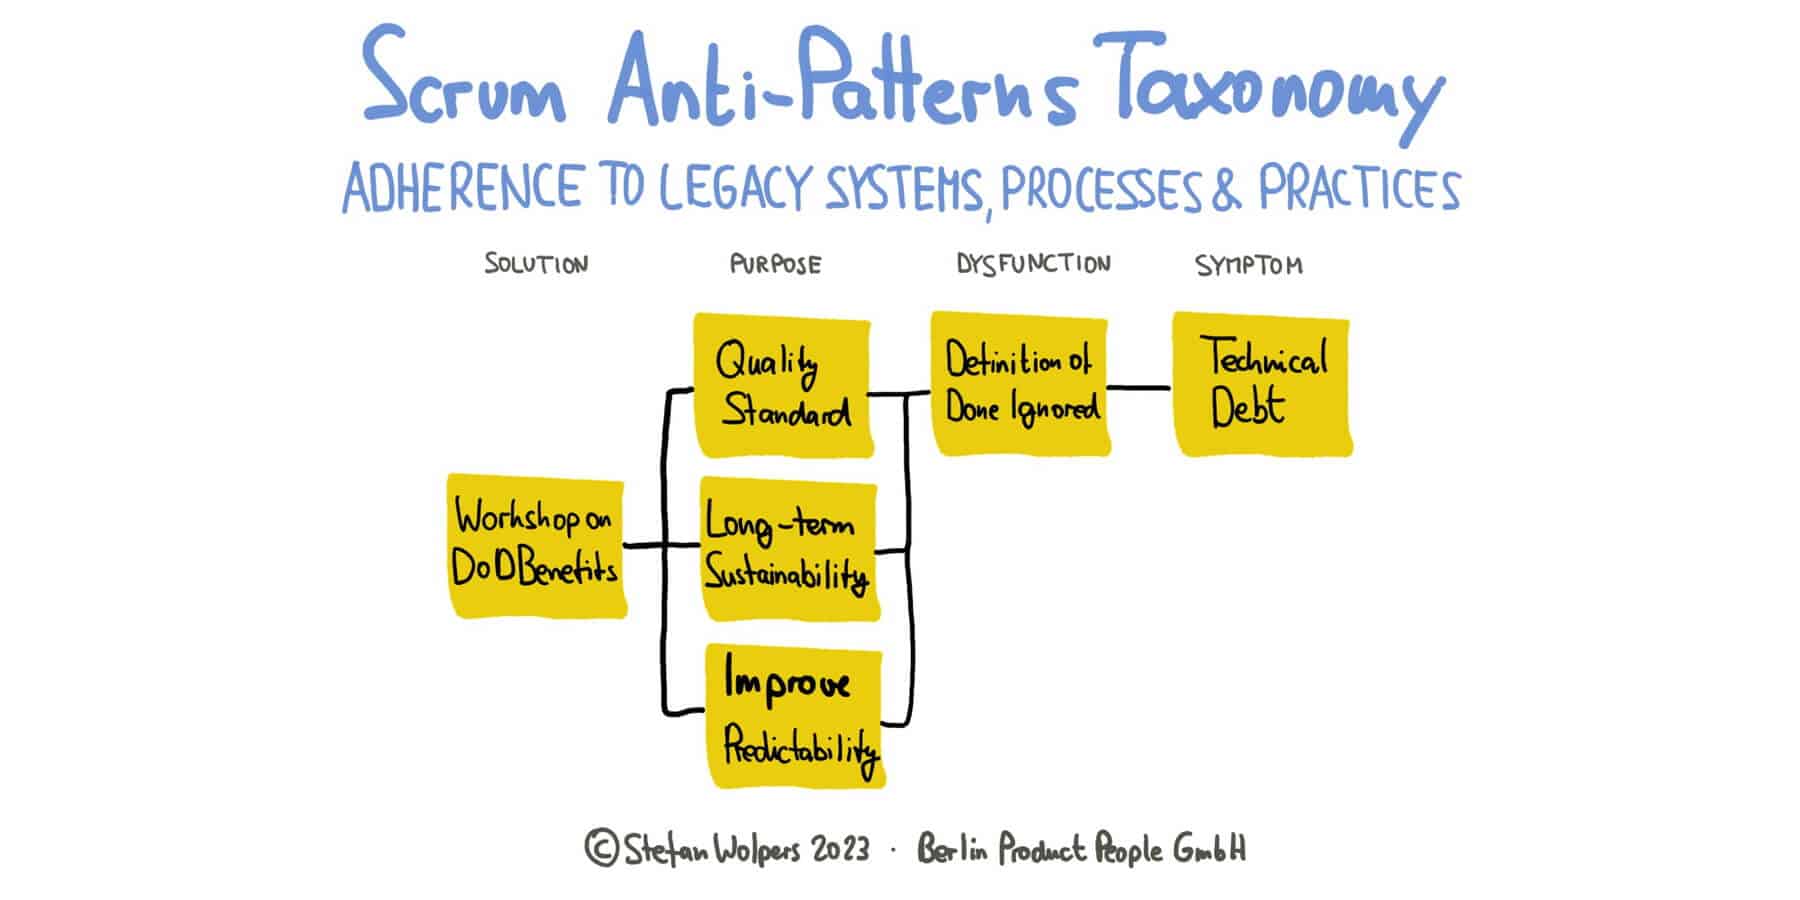 Adherence to Legacy Systems, Processes, and Practices — Scrum Anti-Patterns Taxonomy (1) — Berlin-Product-People.com